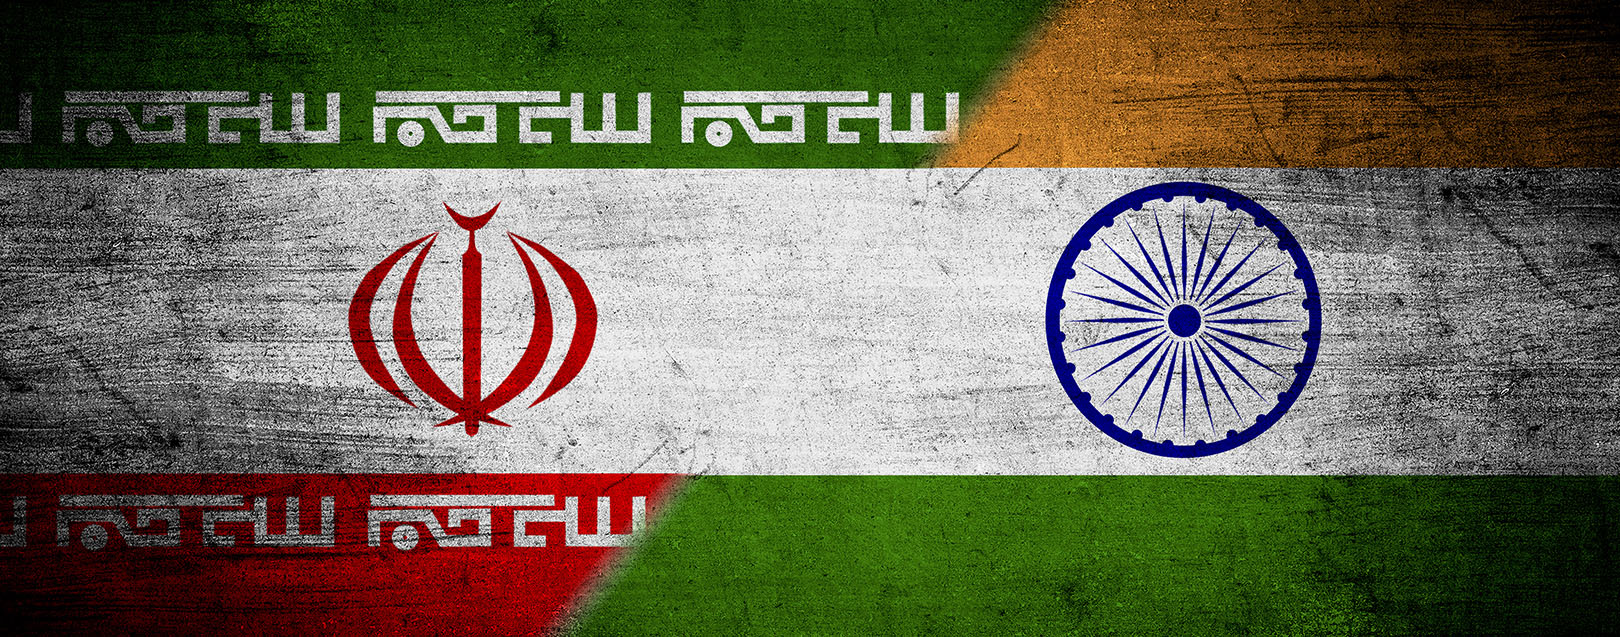 Currency ambiguity weighs on India-Iran trade